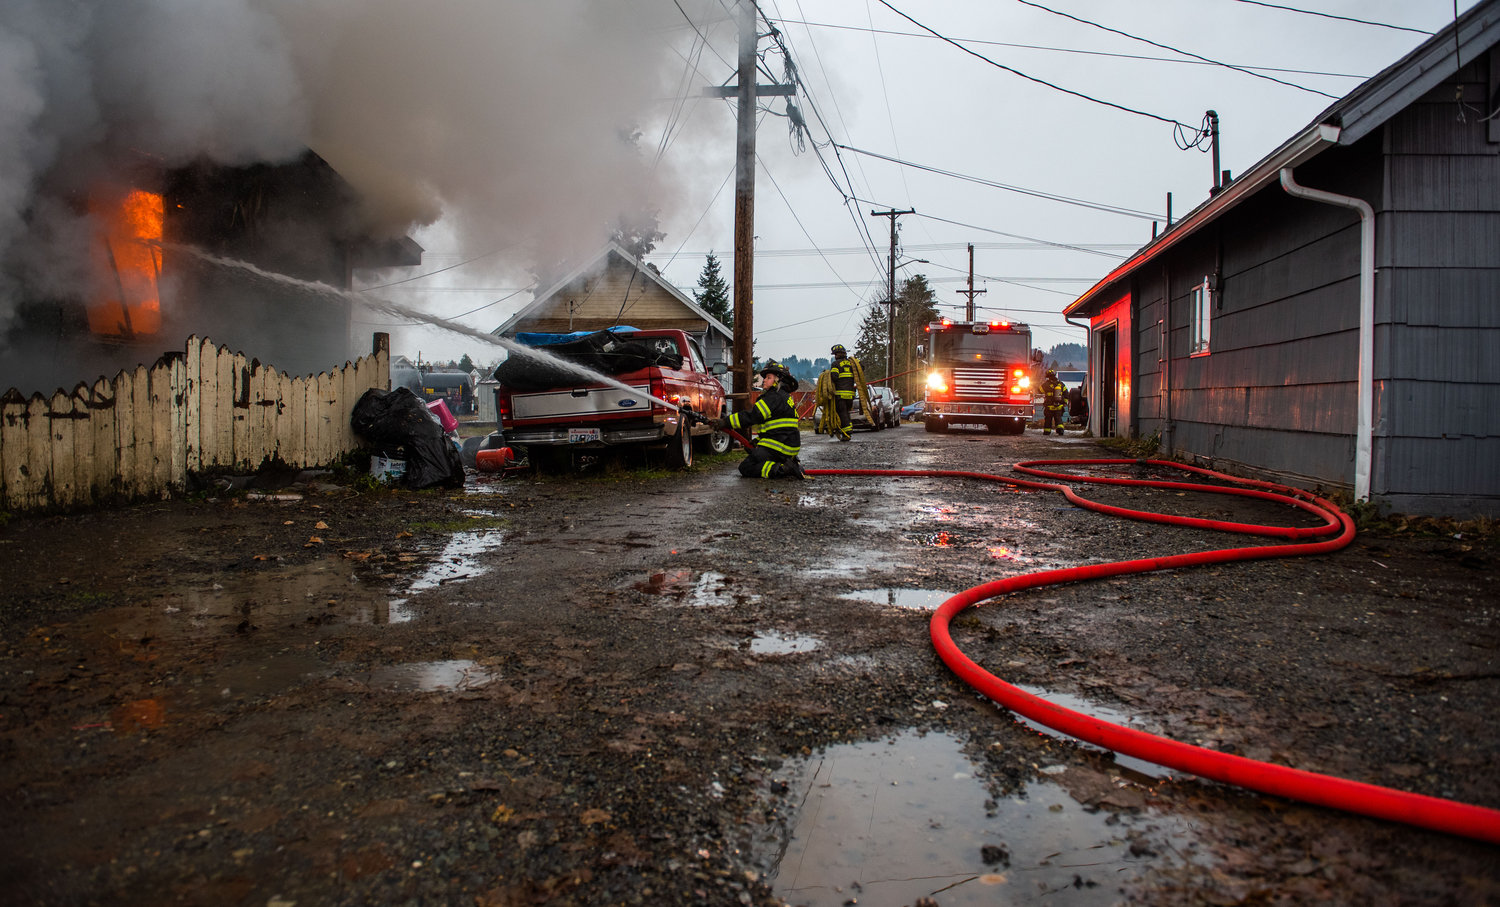 Riverside Fire Authority responds to a residential structure fire off W. Main Street in Centralia on Sunday.